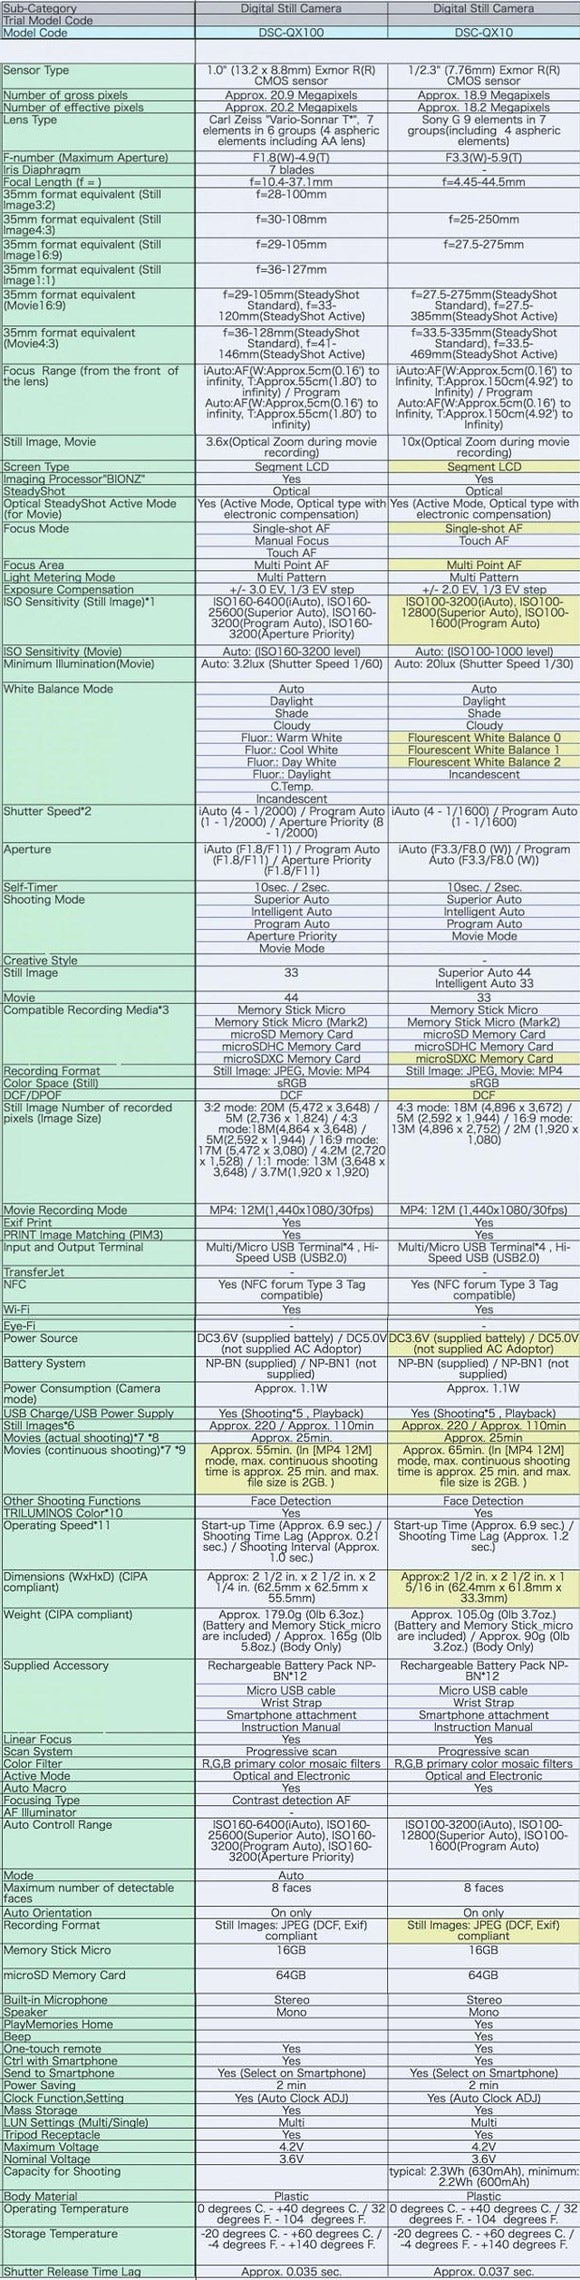 See the full leaked specs rundown of Sony's QX10 and QX100 &quot;lens-style cameras&quot;